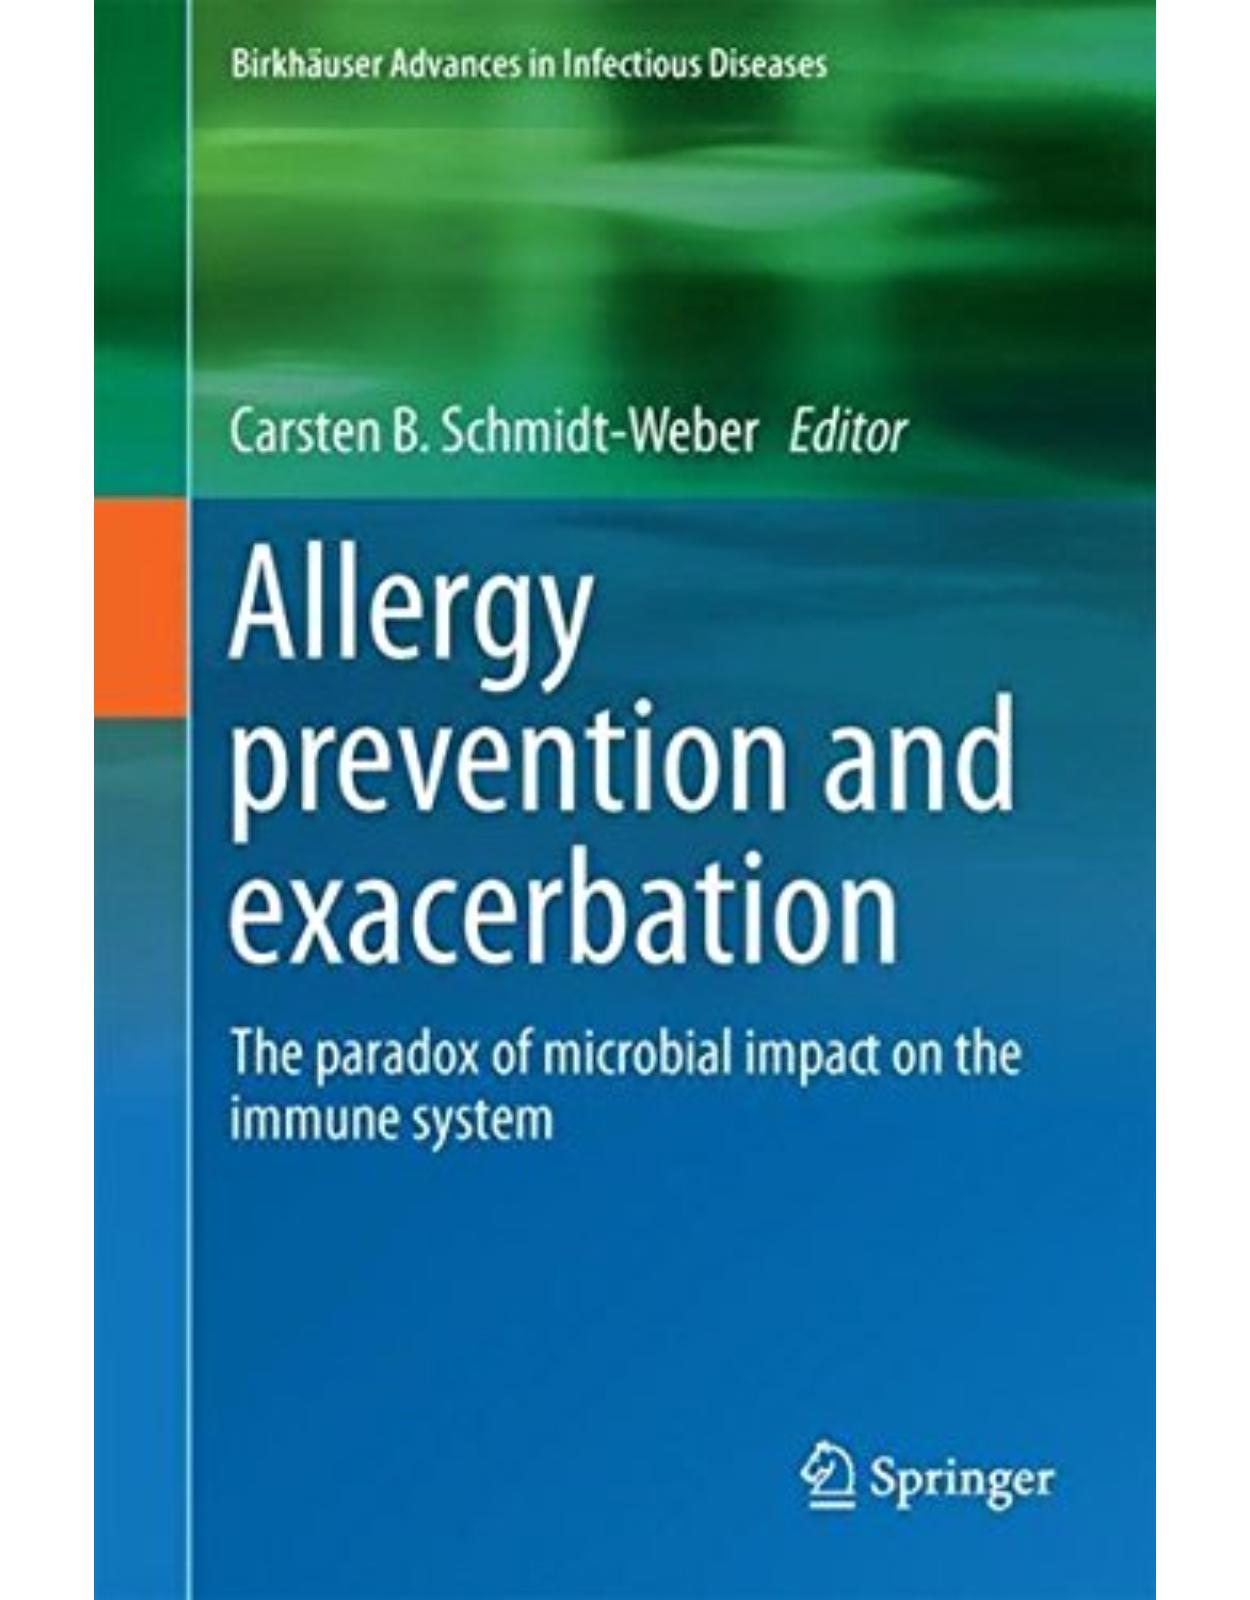 Allergy Prevention and Exacerbation: The Paradox of Microbial Impact on the Immune System (BirkhÃƒÂ¤user Advances in Infectious Diseases)